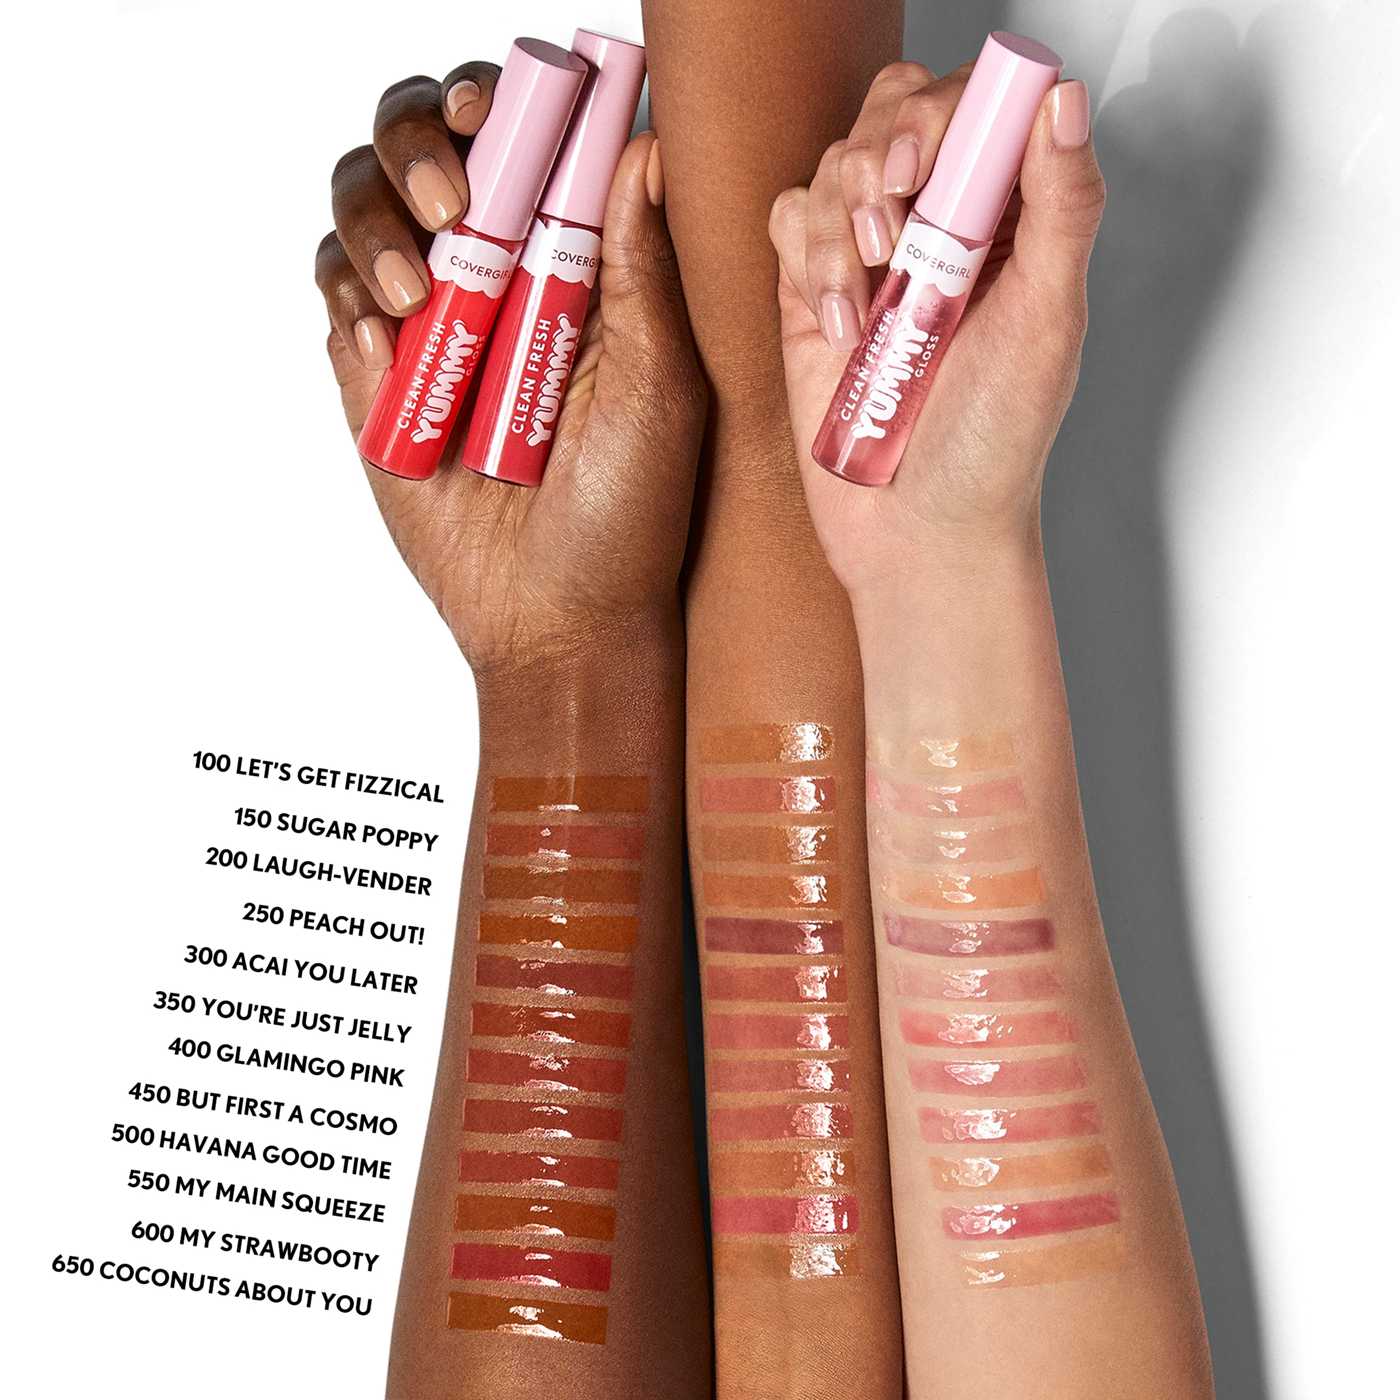 Covergirl Clean Fresh Yummy Lip Gloss - But First a Cosmo; image 6 of 9